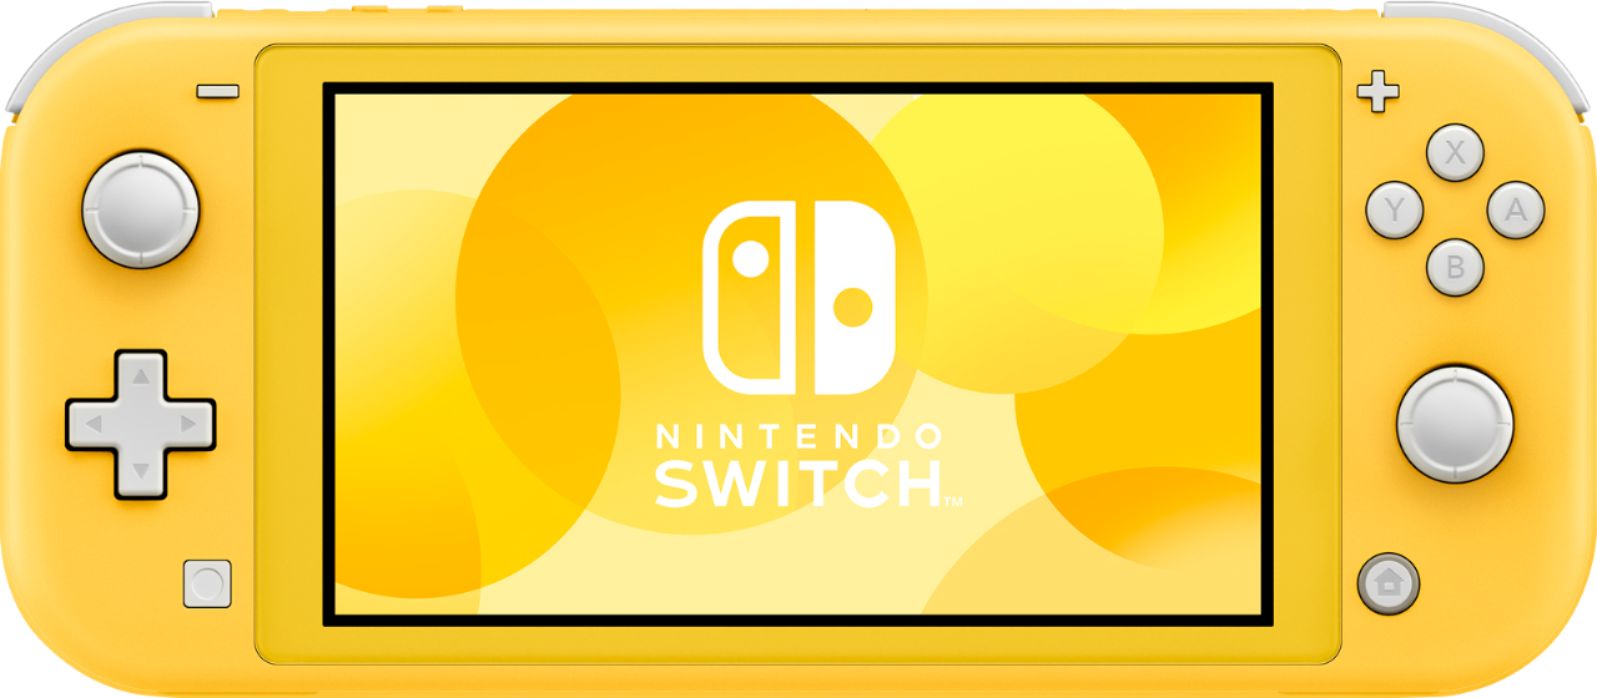 Nintendo Switch Lite Yellow with Pokemon Sword and Mytrix Accessories NS Game Disc Bundle Best Holiday Gift